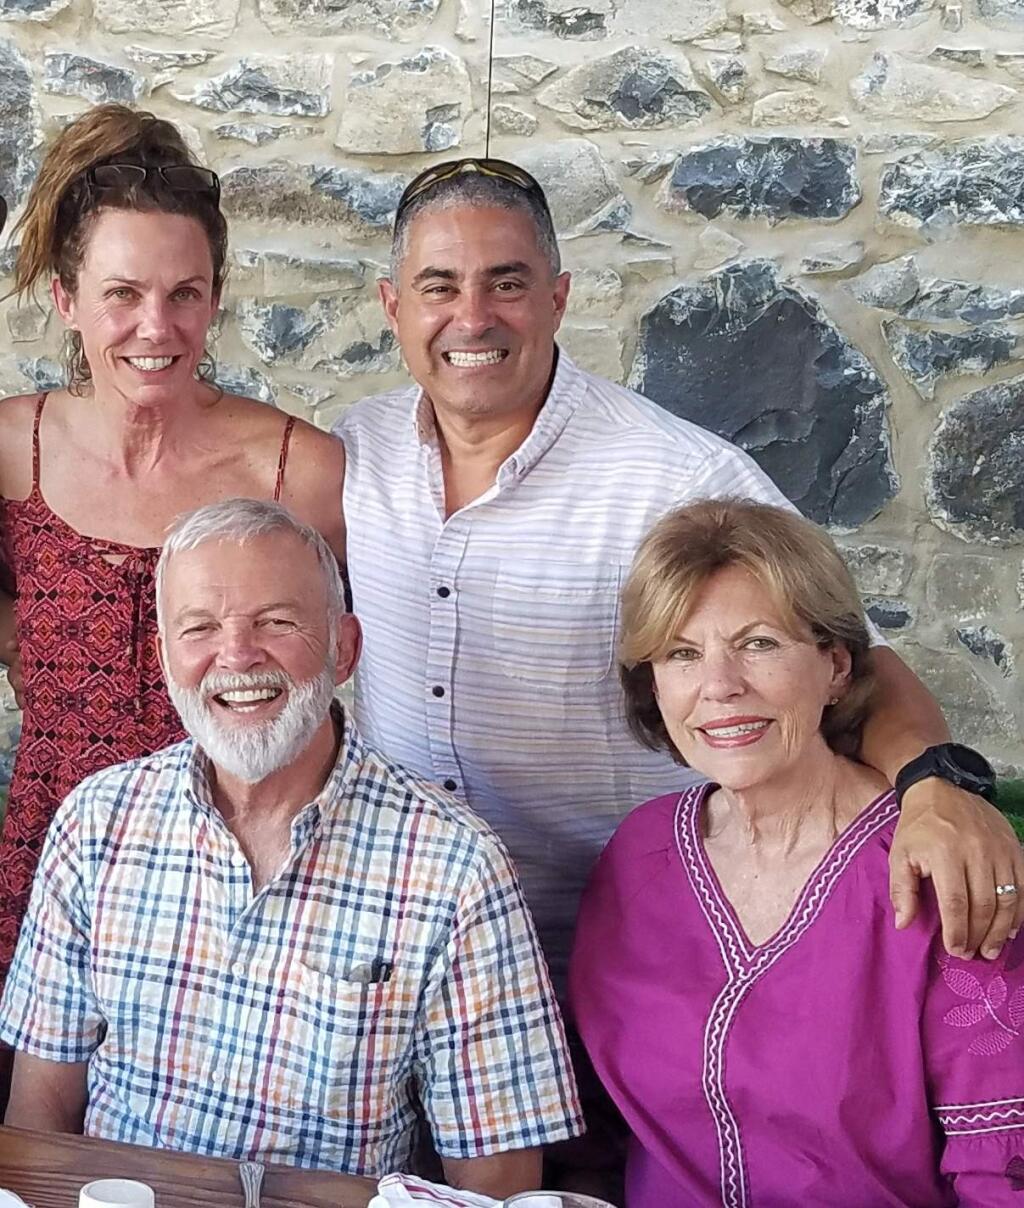 Carmen Berriz, 75, bottom right, died in the Tubbs fire. Her husband, Armando Berriz, bottom left, suffered 2nd and 3rd degree burns. They are pictured here with their daughter, Monica Ocon, and son-in-law, Luis Ocon. (Courtesy photo)